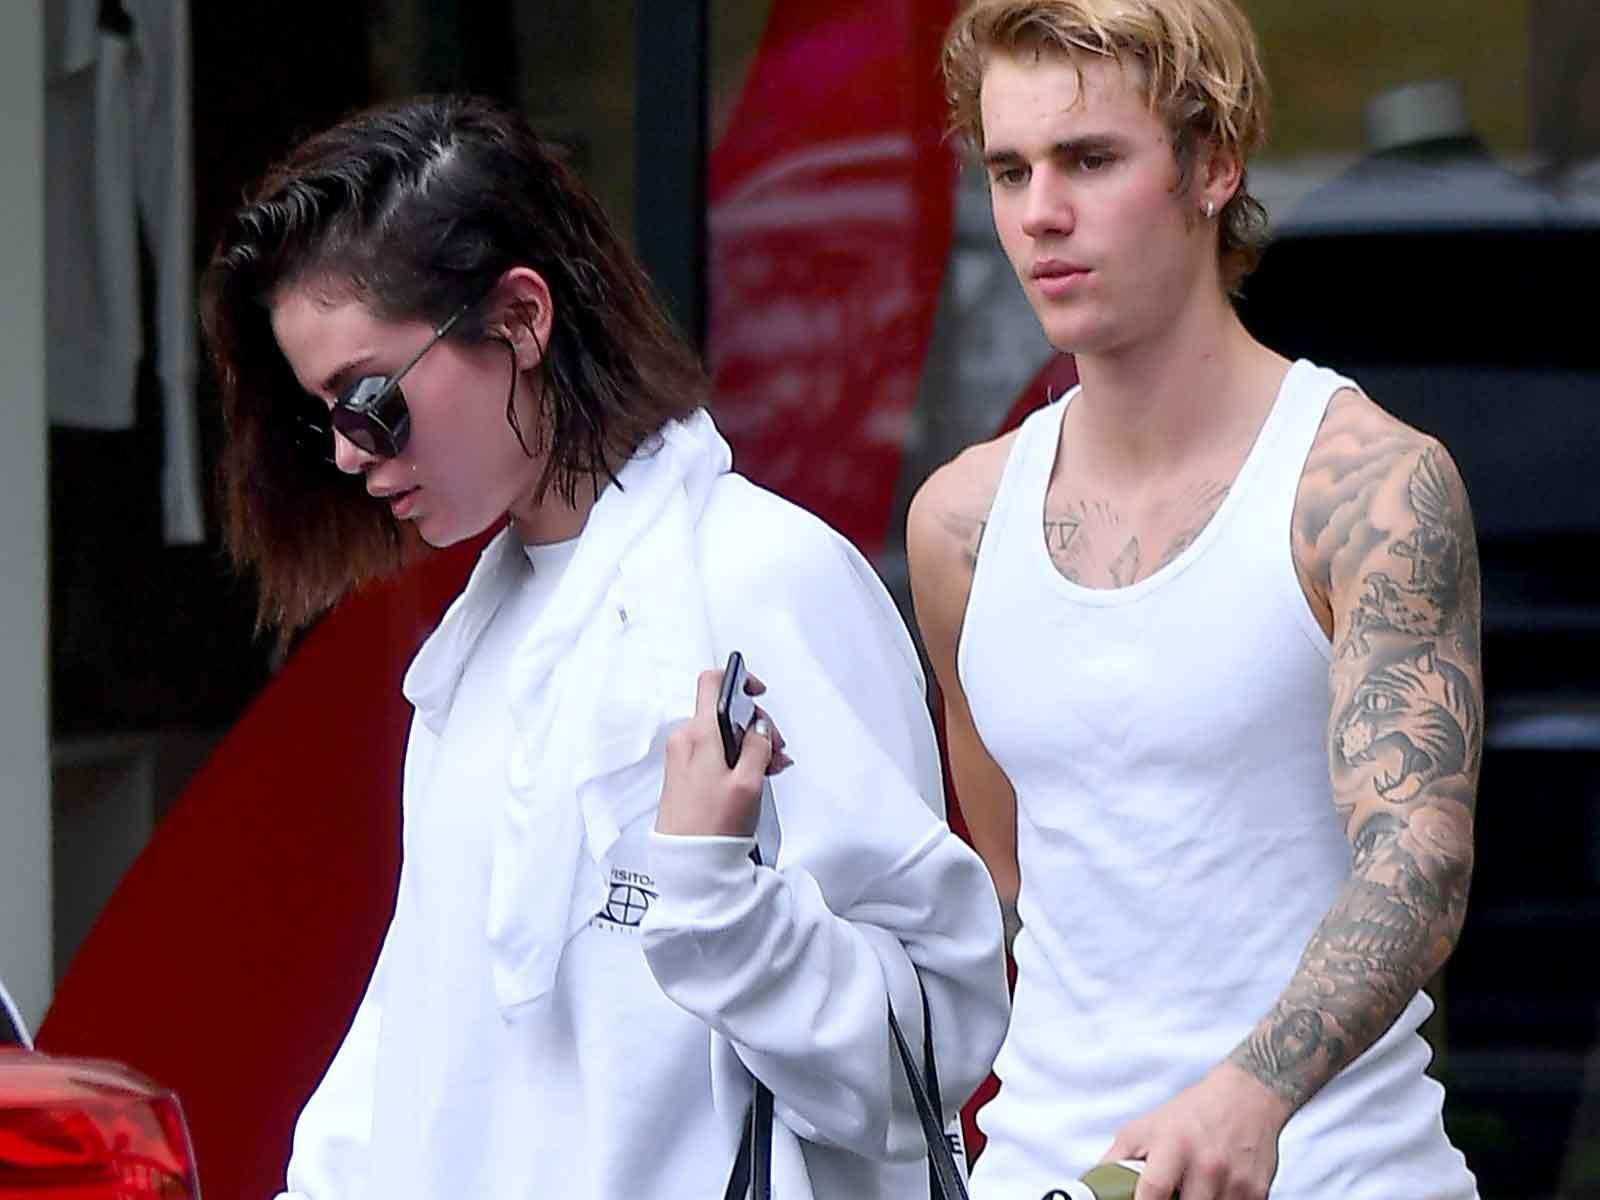 Justin Bieber & Selena Gomez Sweating Together, Staying Together Into the New Year